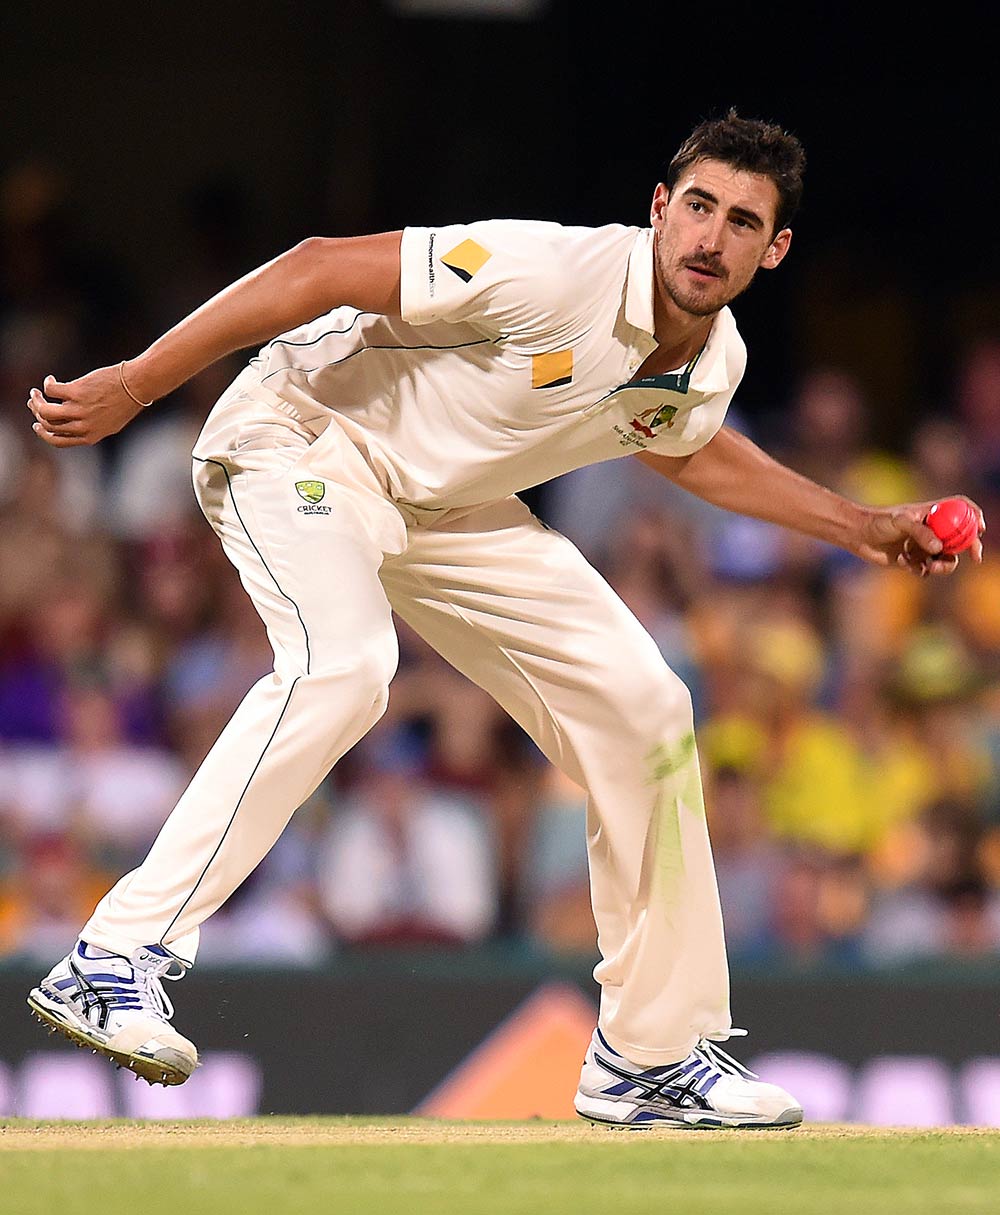 Australian bowler Mitchell Starc with the pink ball